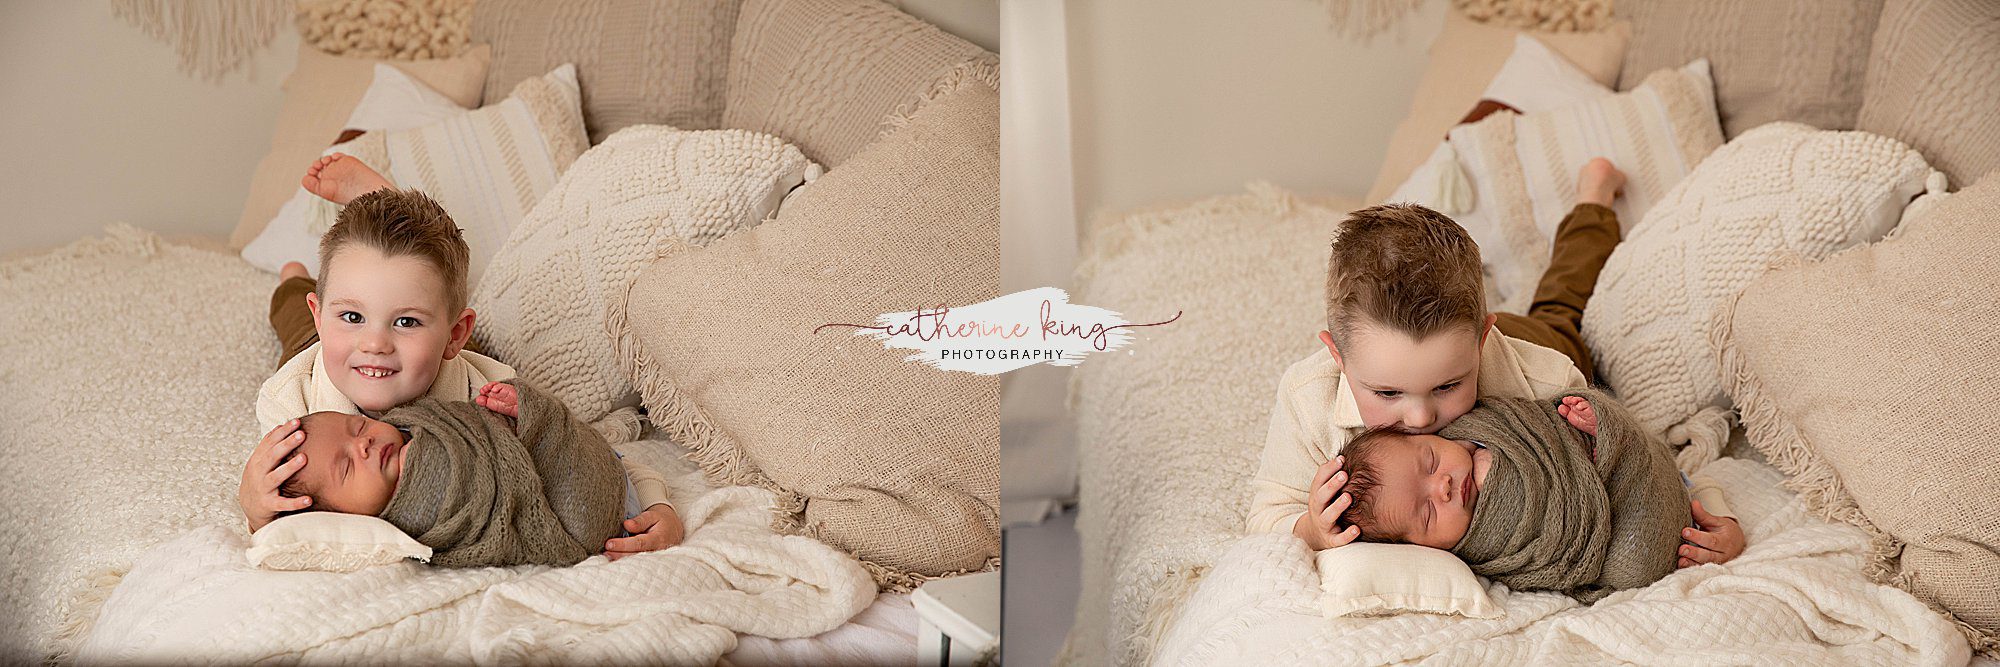 Newborn Photography in Connecticut: Capturing the Precious First Moments